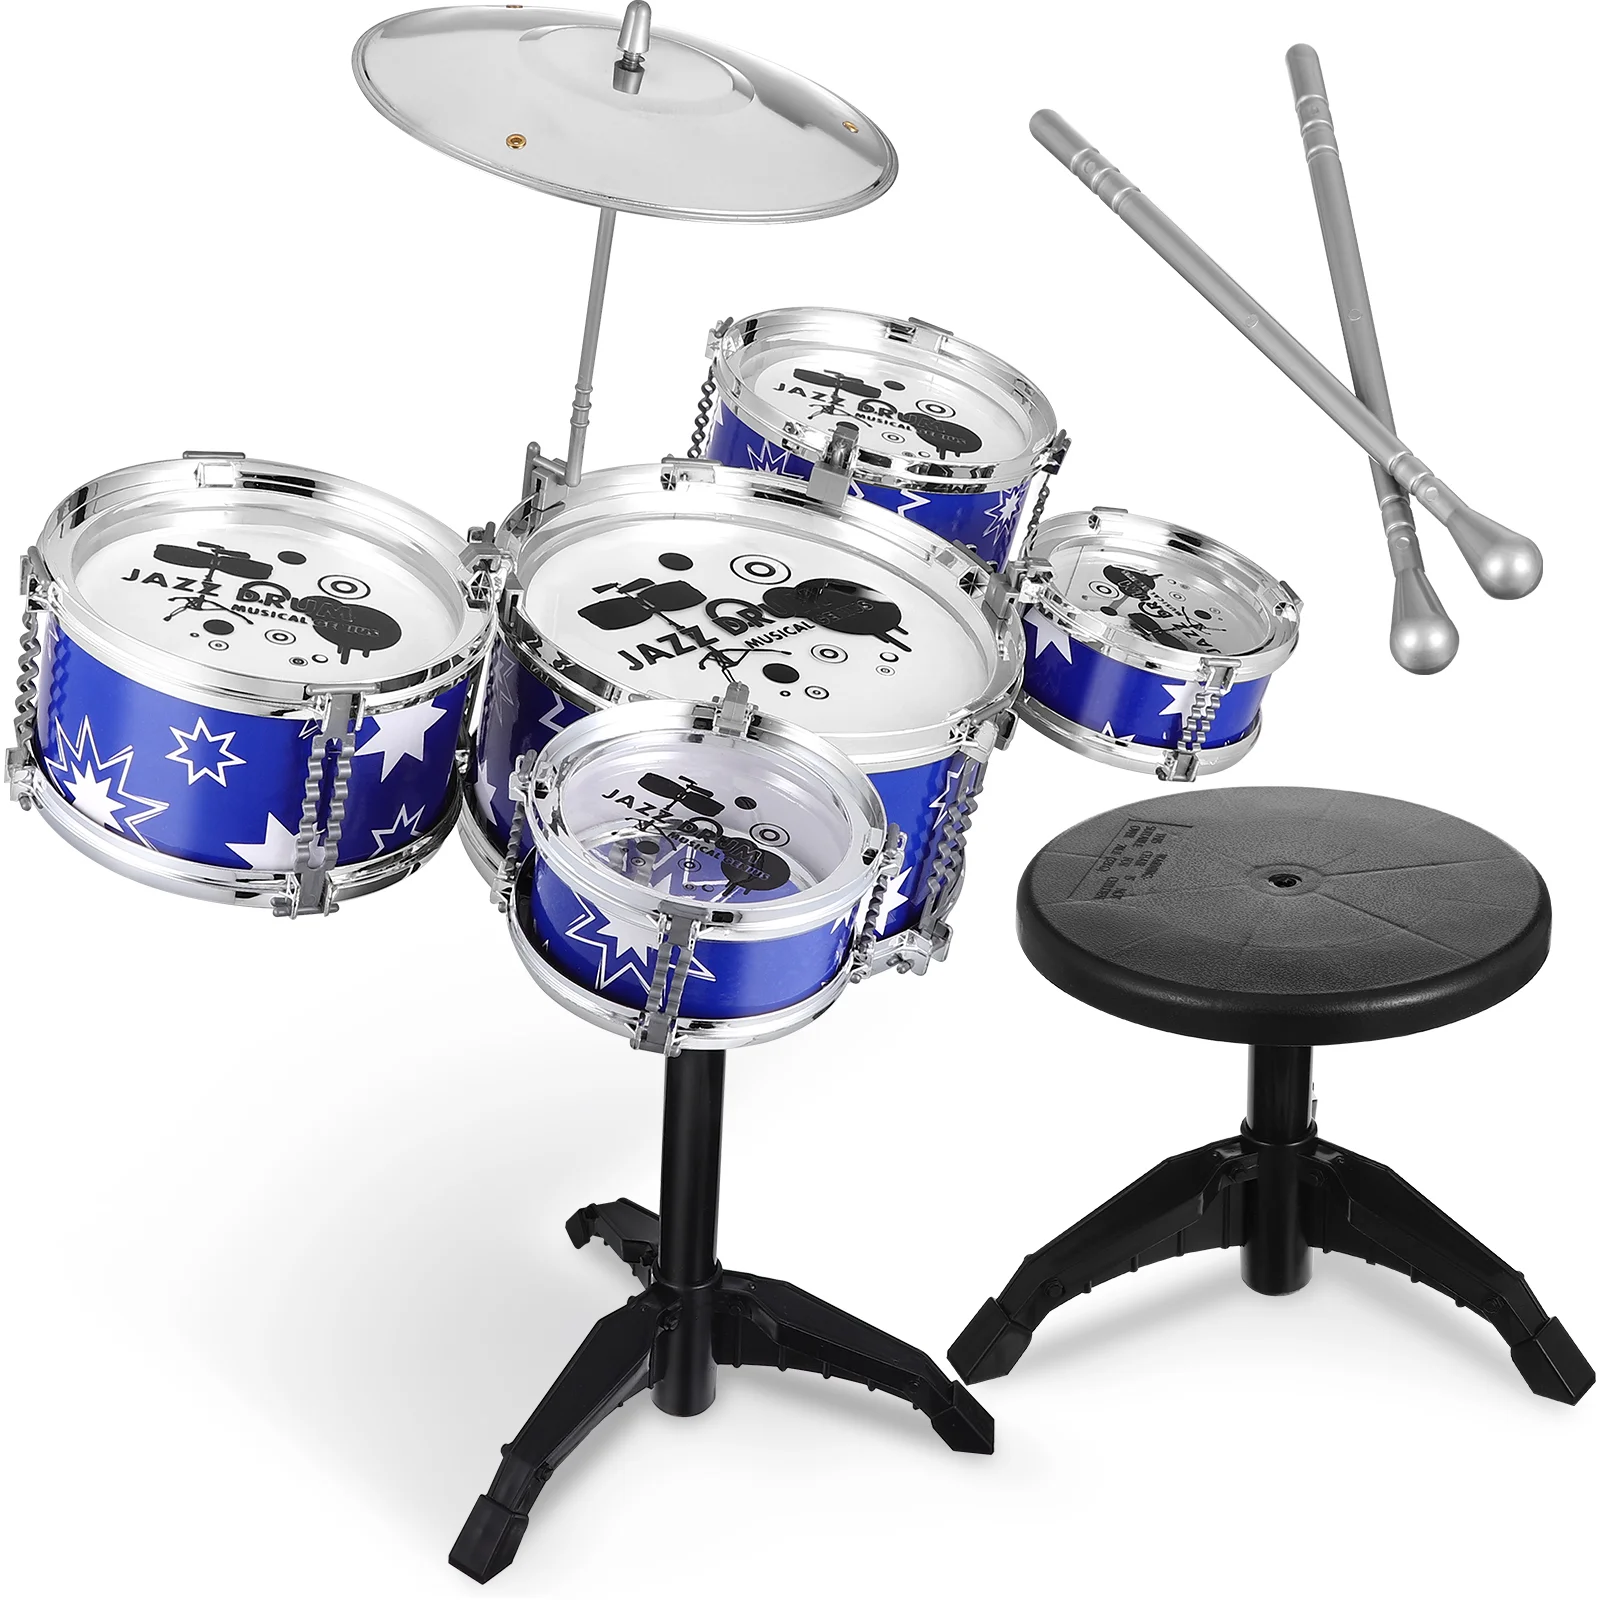 

Kids Drum Set Kids Jazz Drum Kit Toddler Toys Drums Stool Pedal Percussion Musical Instruments Drum Toy Birthday Early Education